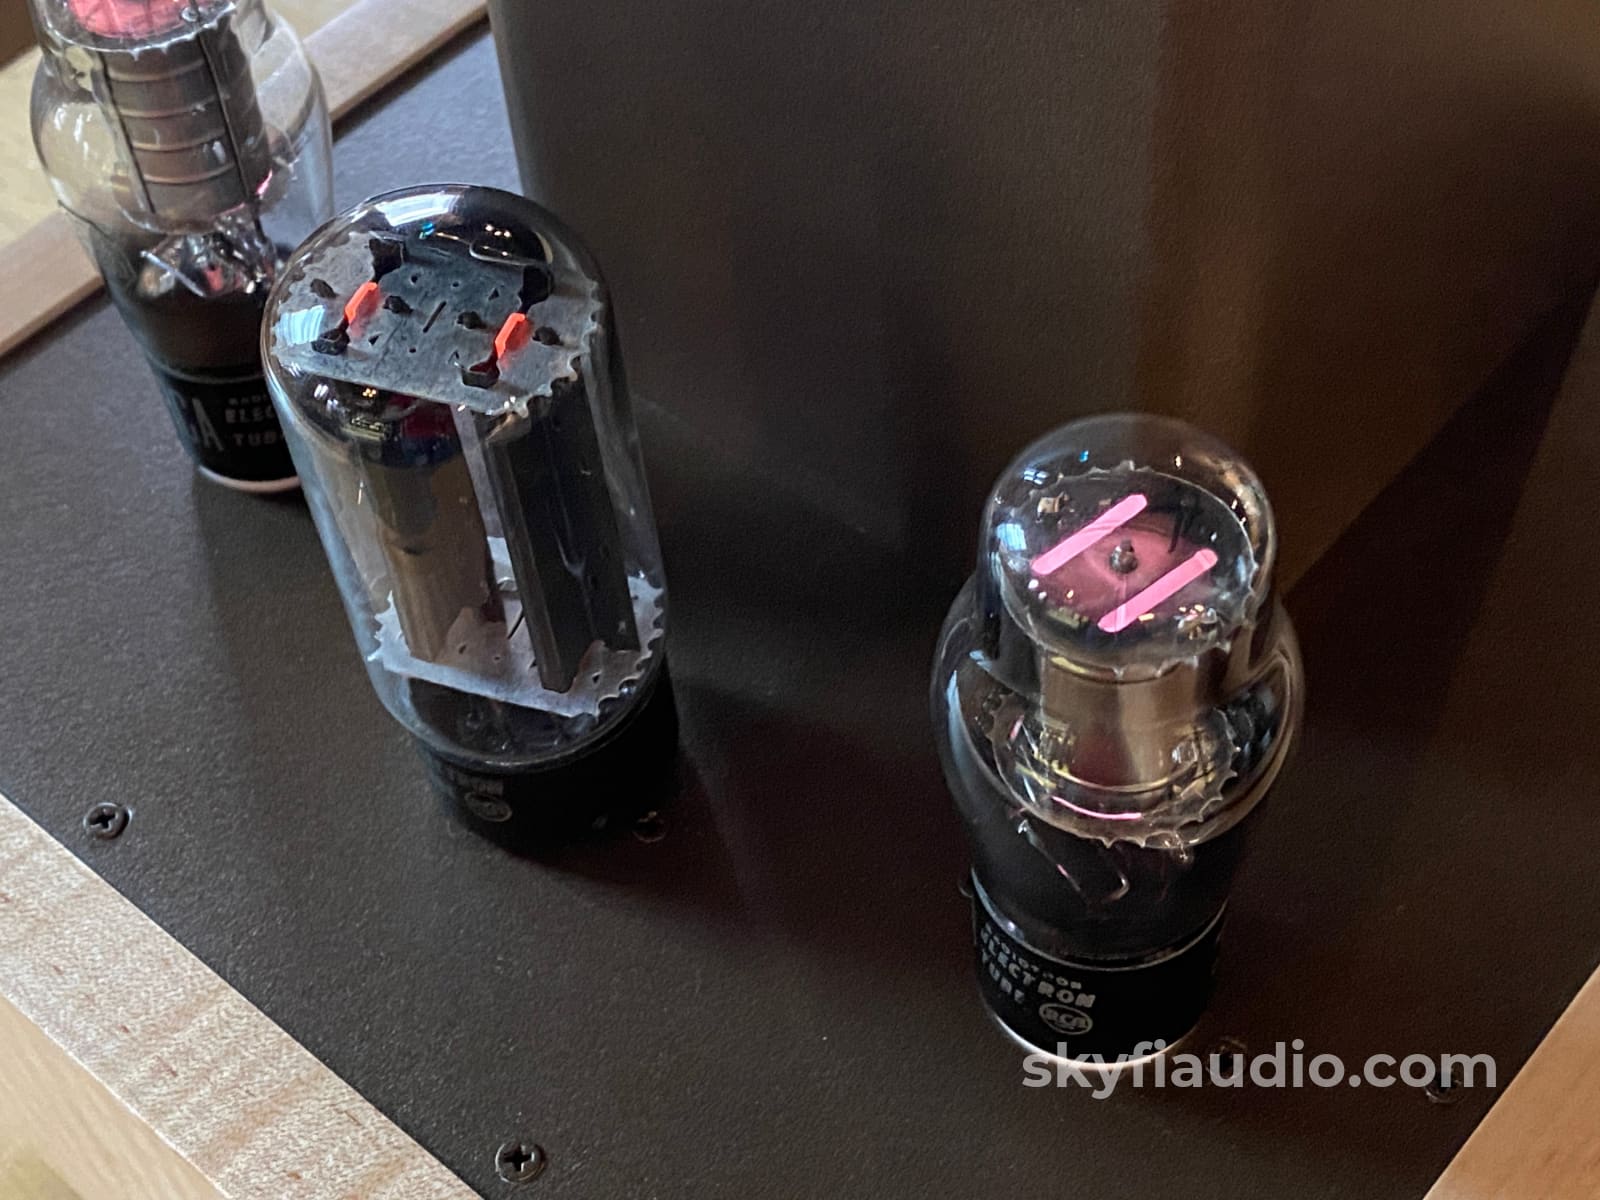 Aric Audio Motherlode Ii Tube Preamp In Custom Cabinet With Upgrades Preamplifier